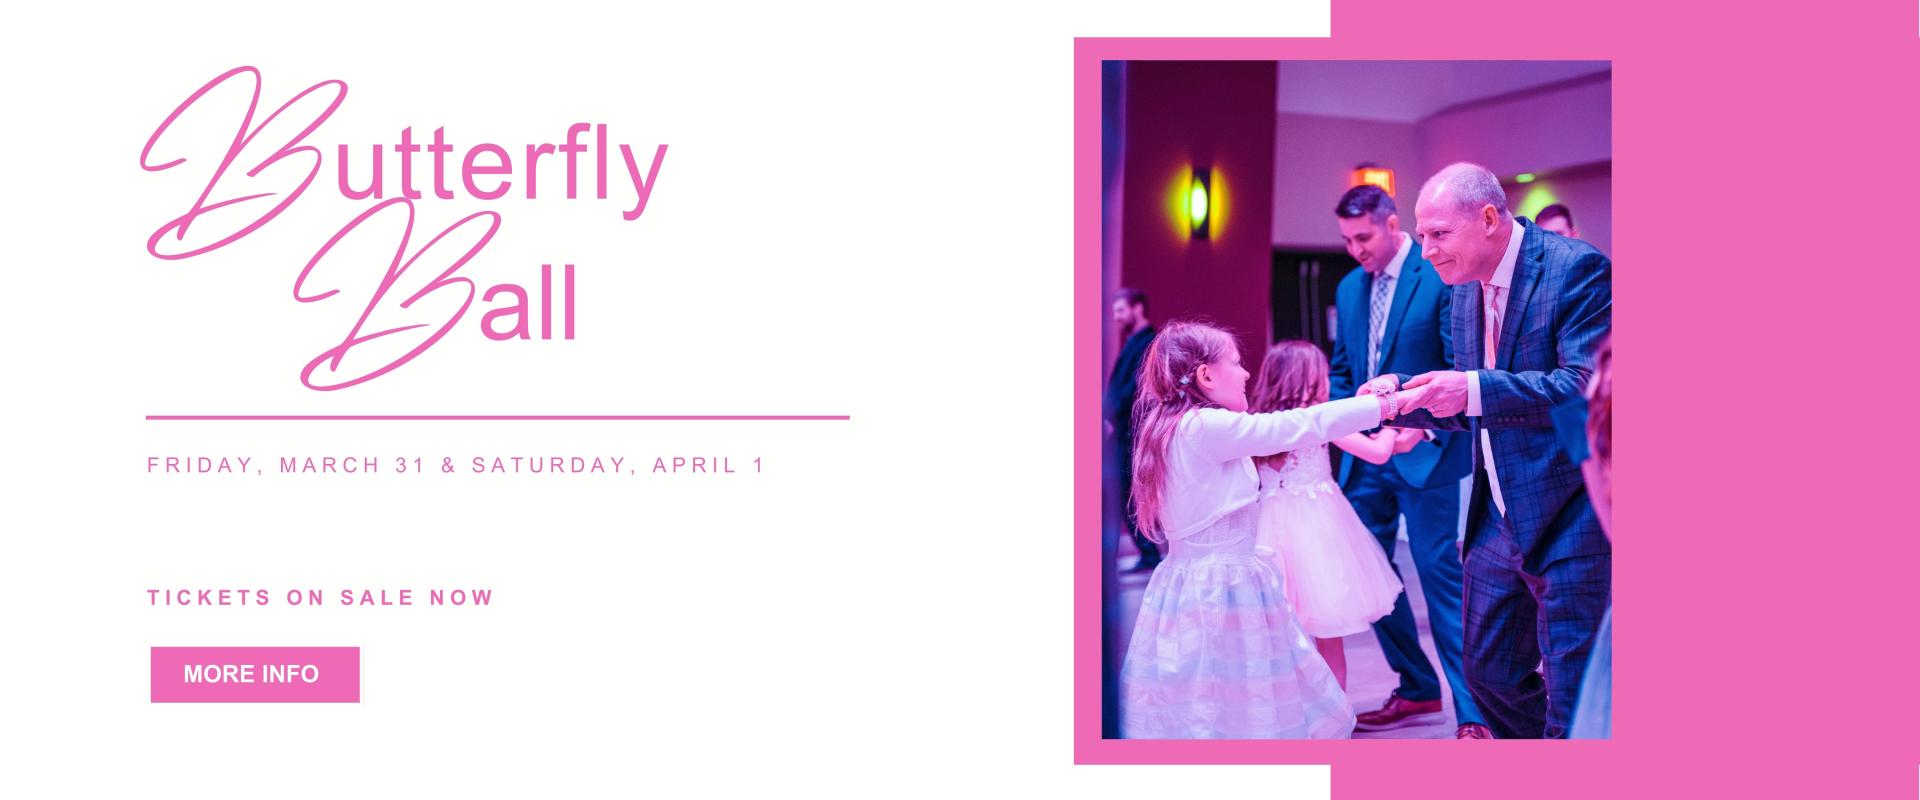 Butterfly Ball - Friday, March 31 & Saturday April 1 - Tickets on sale  now - MORE INFO button - right side has image of male, father figure, dancing with youth girl all dressed up